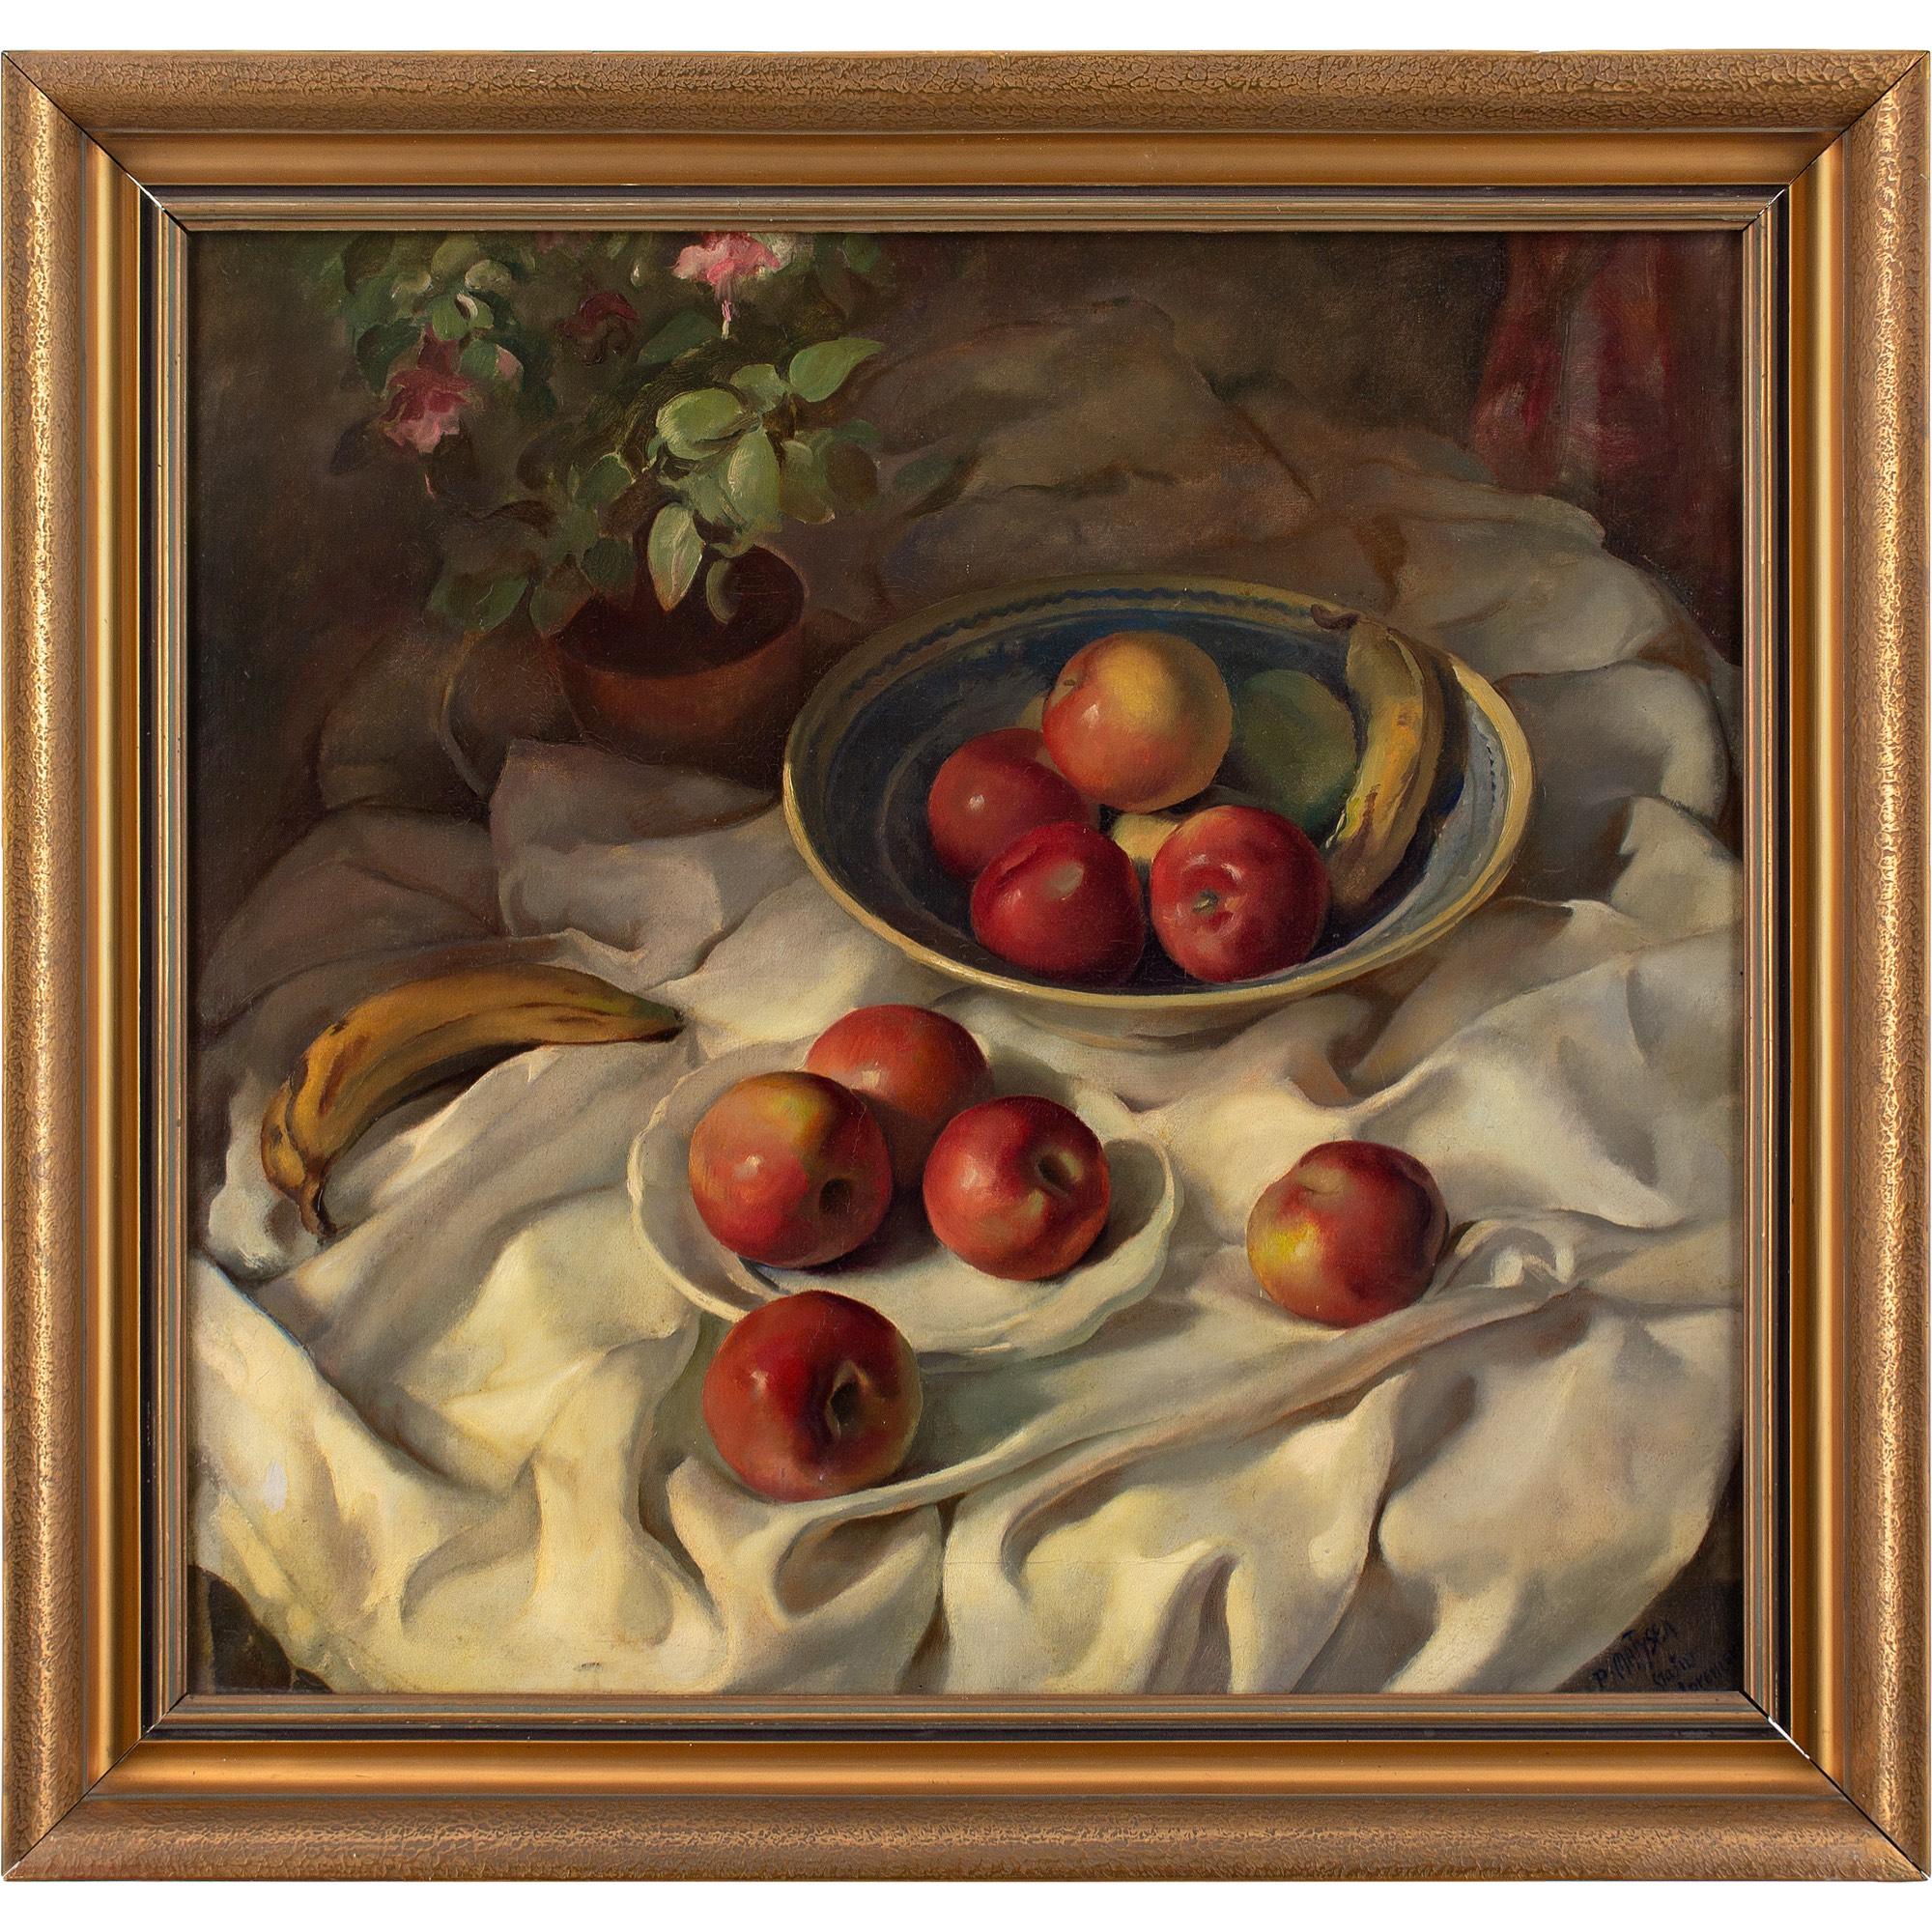 This fine early 20th-century oil painting by Czech artist Petr Matýsek (1885-1941) depicts apples, bananas and a plant arranged on a tablecloth.

Perspective is such an important component of still-life painting. Traditionally, artists have adopted